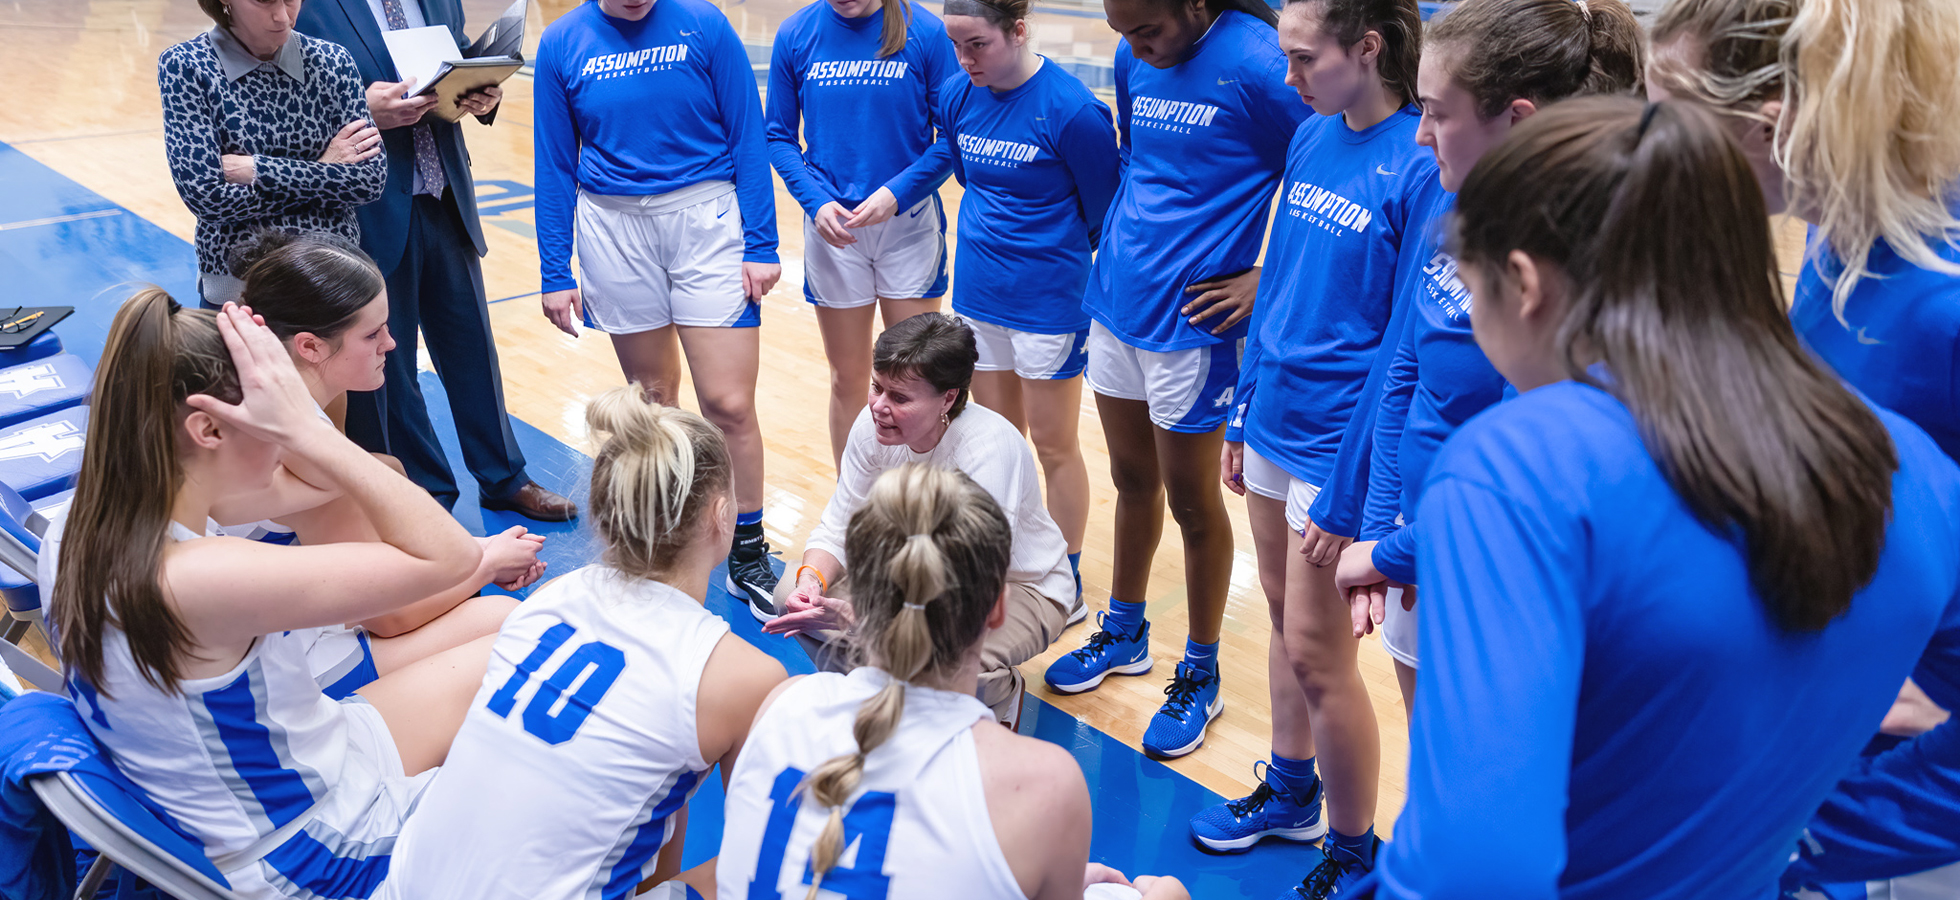 Assumption University Greyhounds Women's Basketball Coach Kerry Phayre surrounded by players during a game.